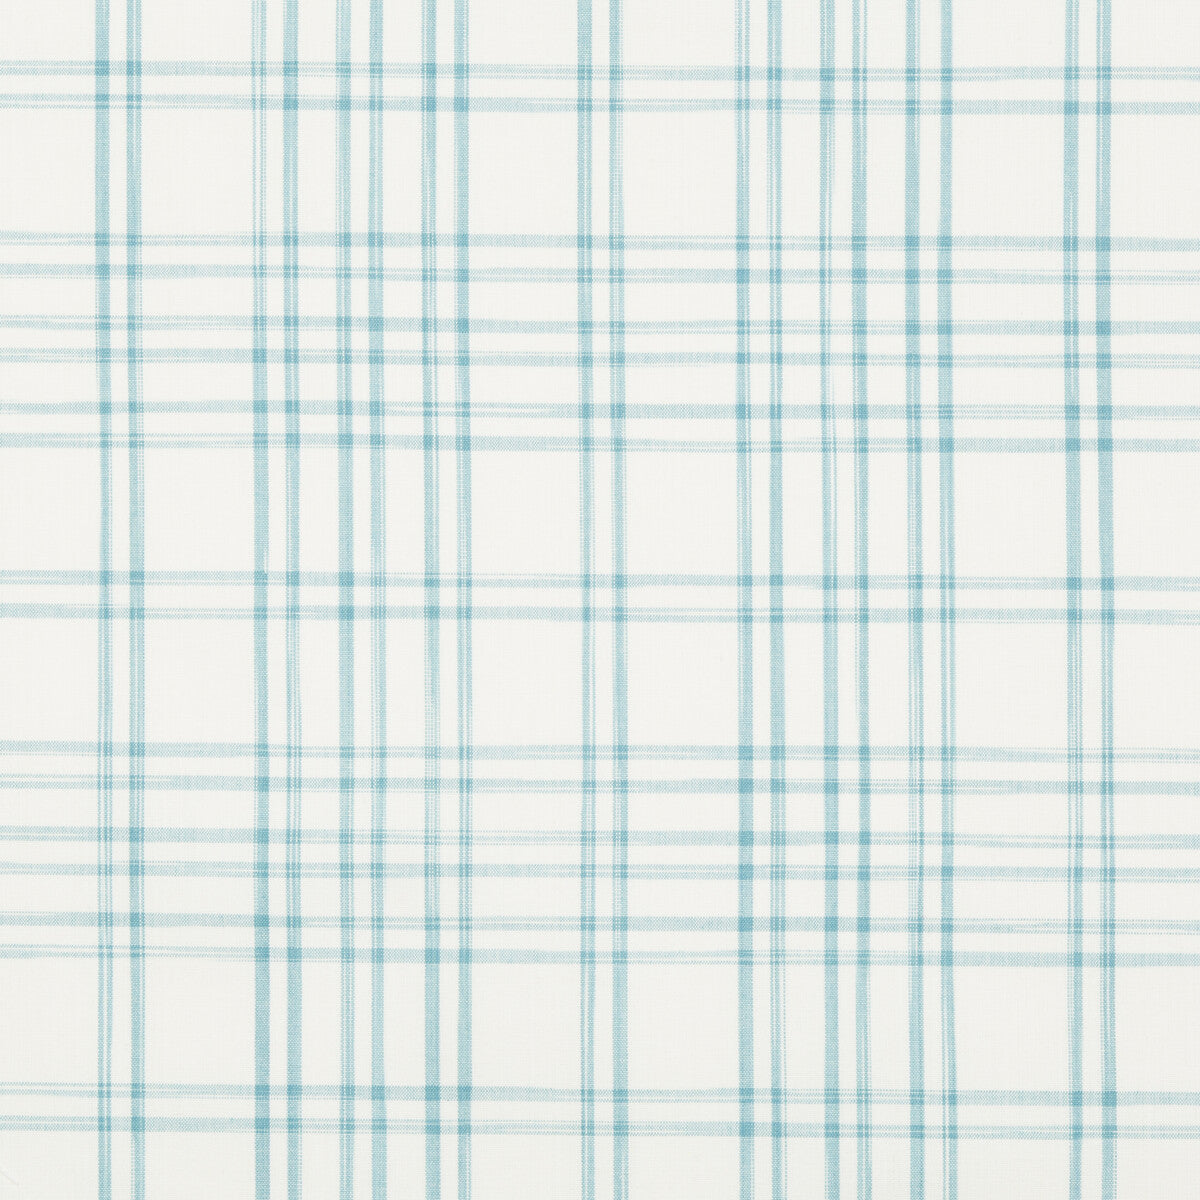 Banon Plaid fabric in turquoise color - pattern 8017100.13.0 - by Brunschwig &amp; Fils in the Durance collection